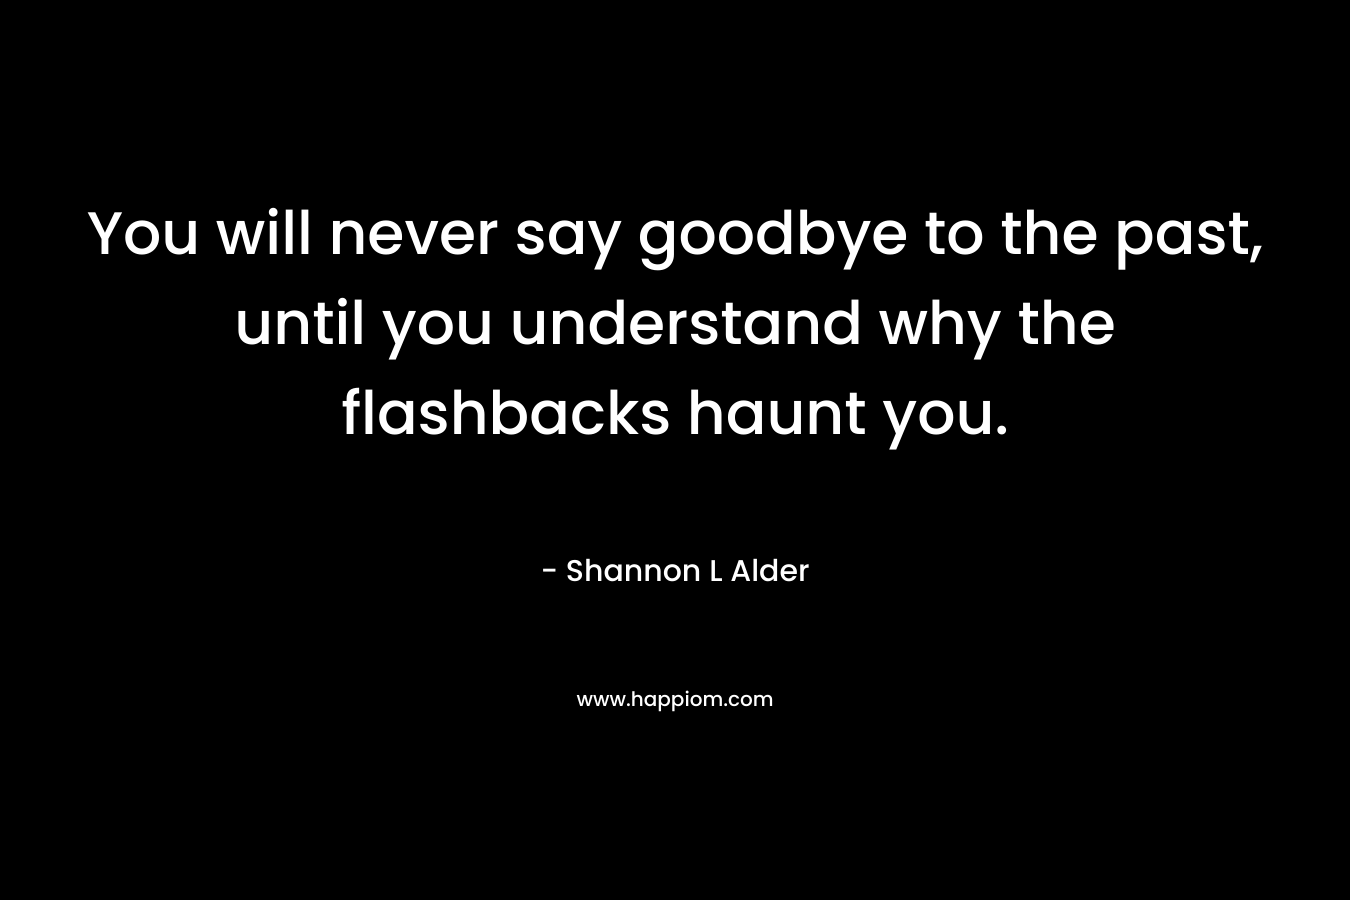 You will never say goodbye to the past, until you understand why the flashbacks haunt you.